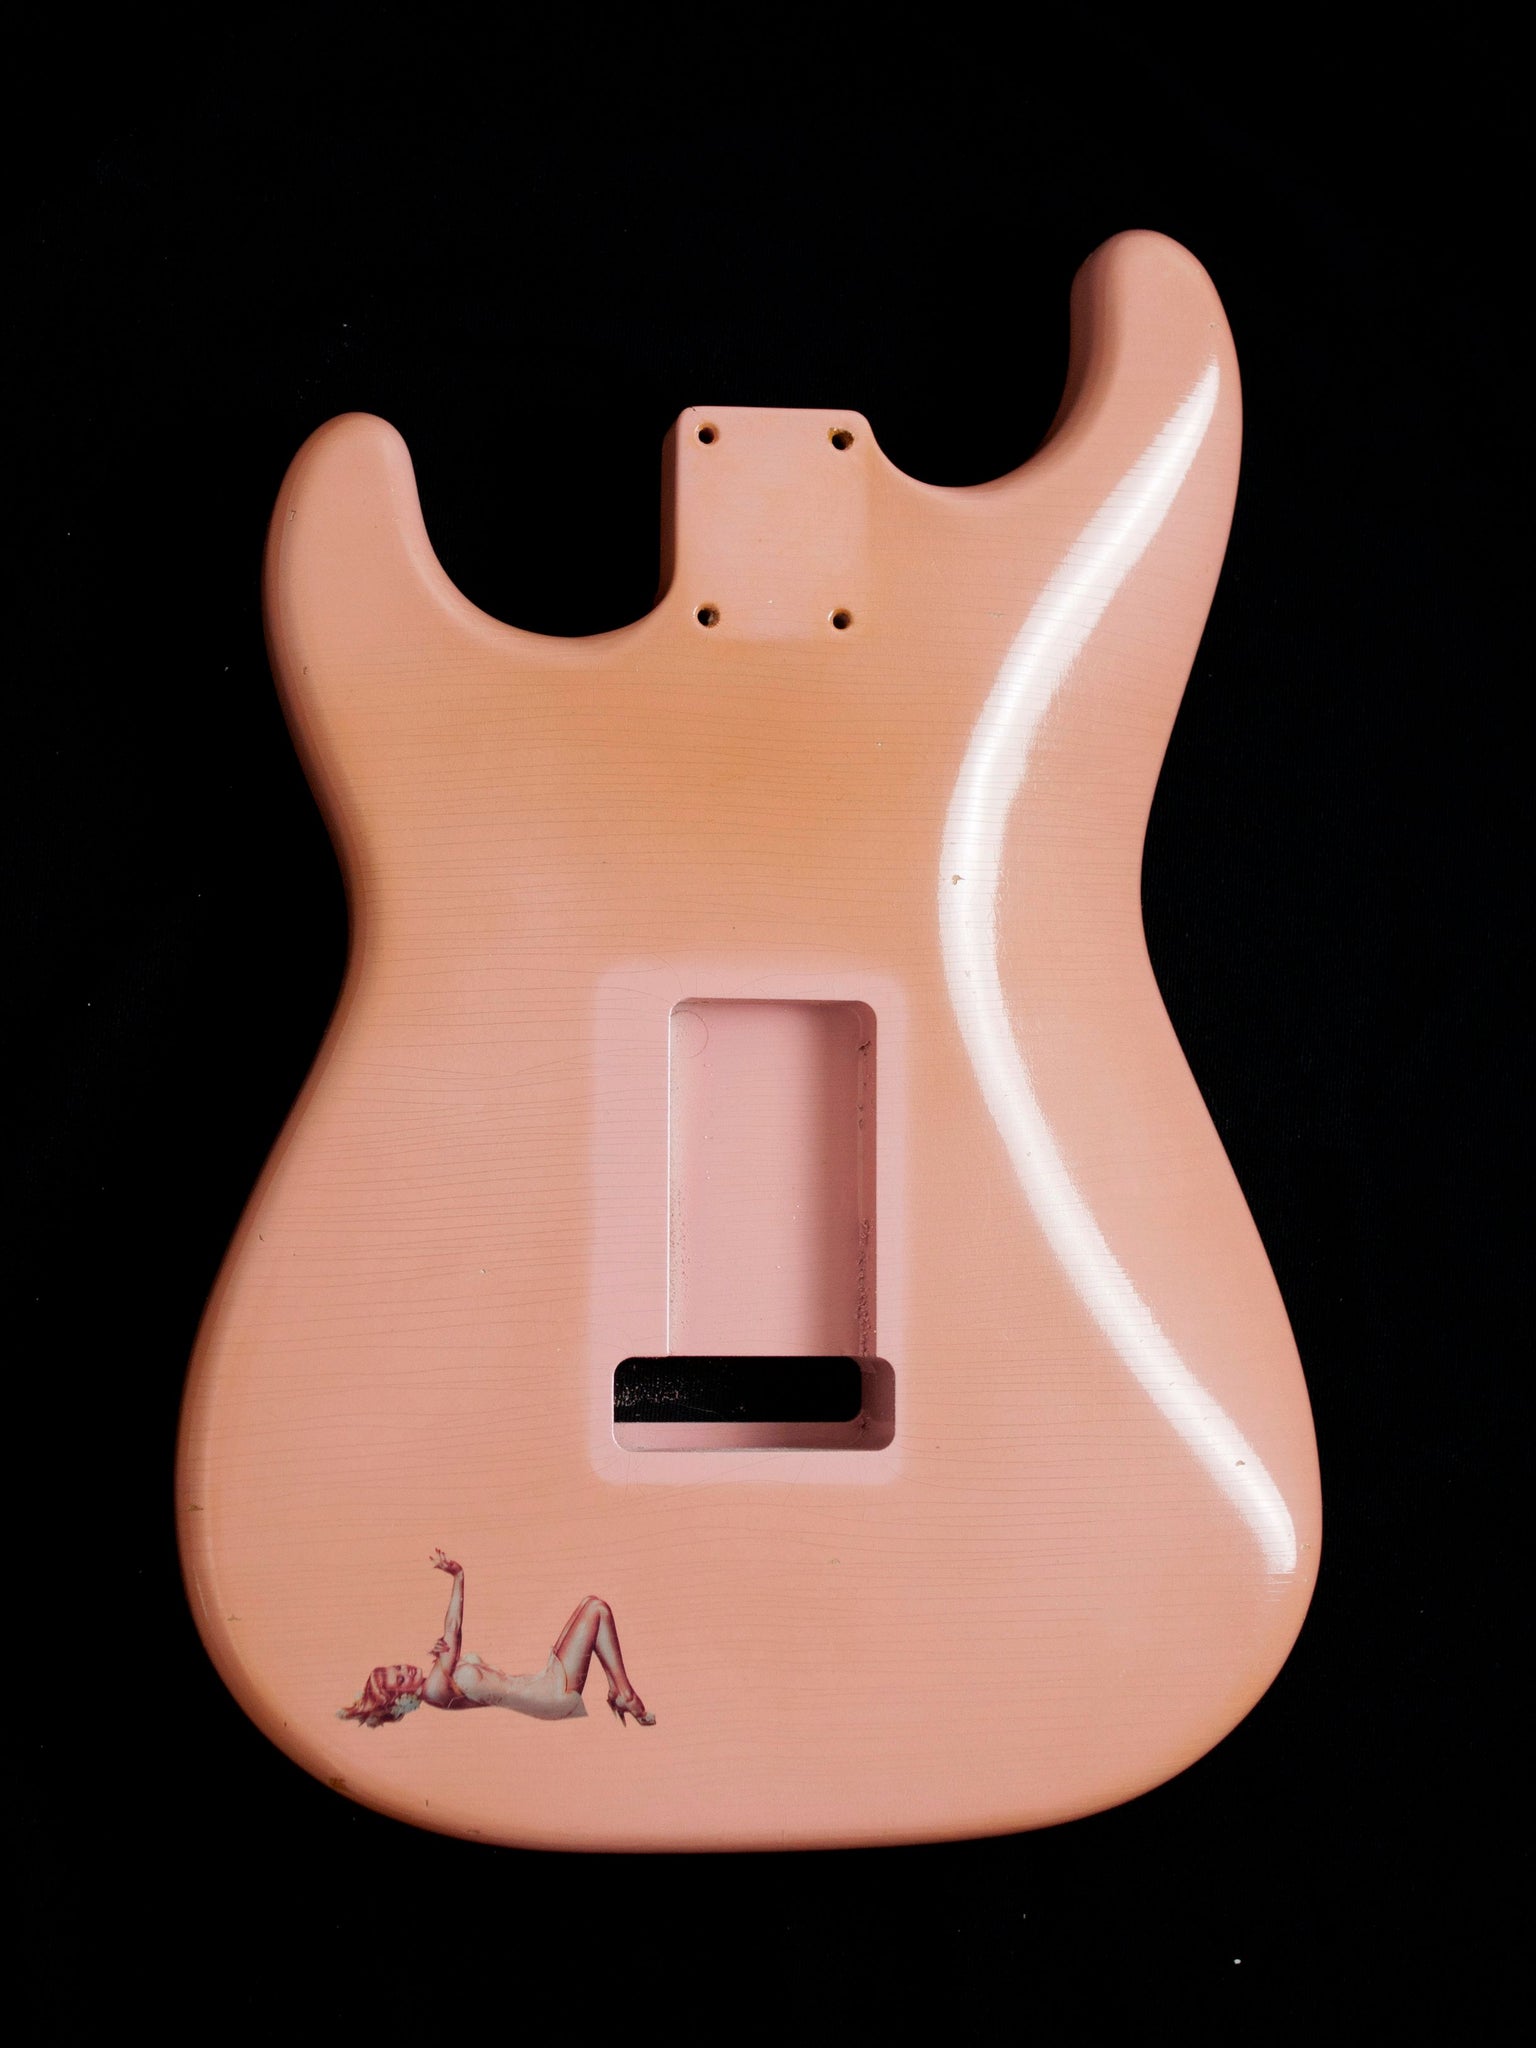 Shell Pink BlueBelle Body and Scratchplate "Lola" GE003BB